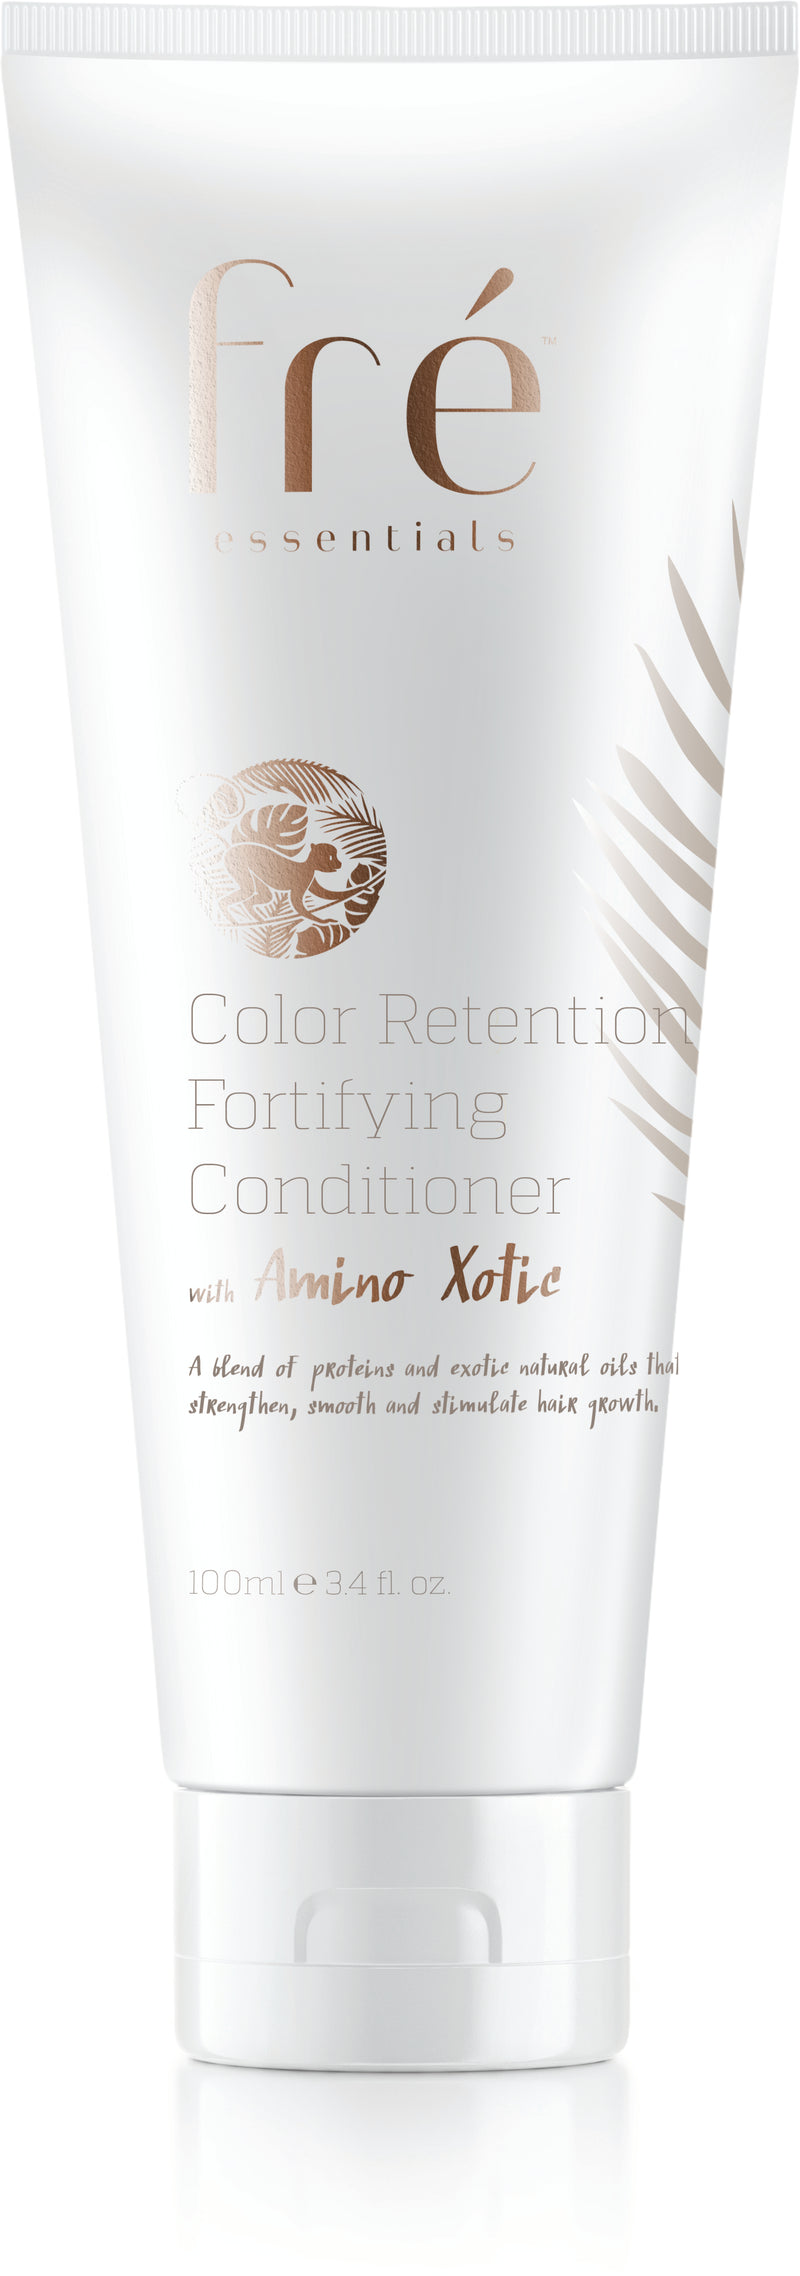 Color Retention Fortifying Conditioner with Amino Xotic